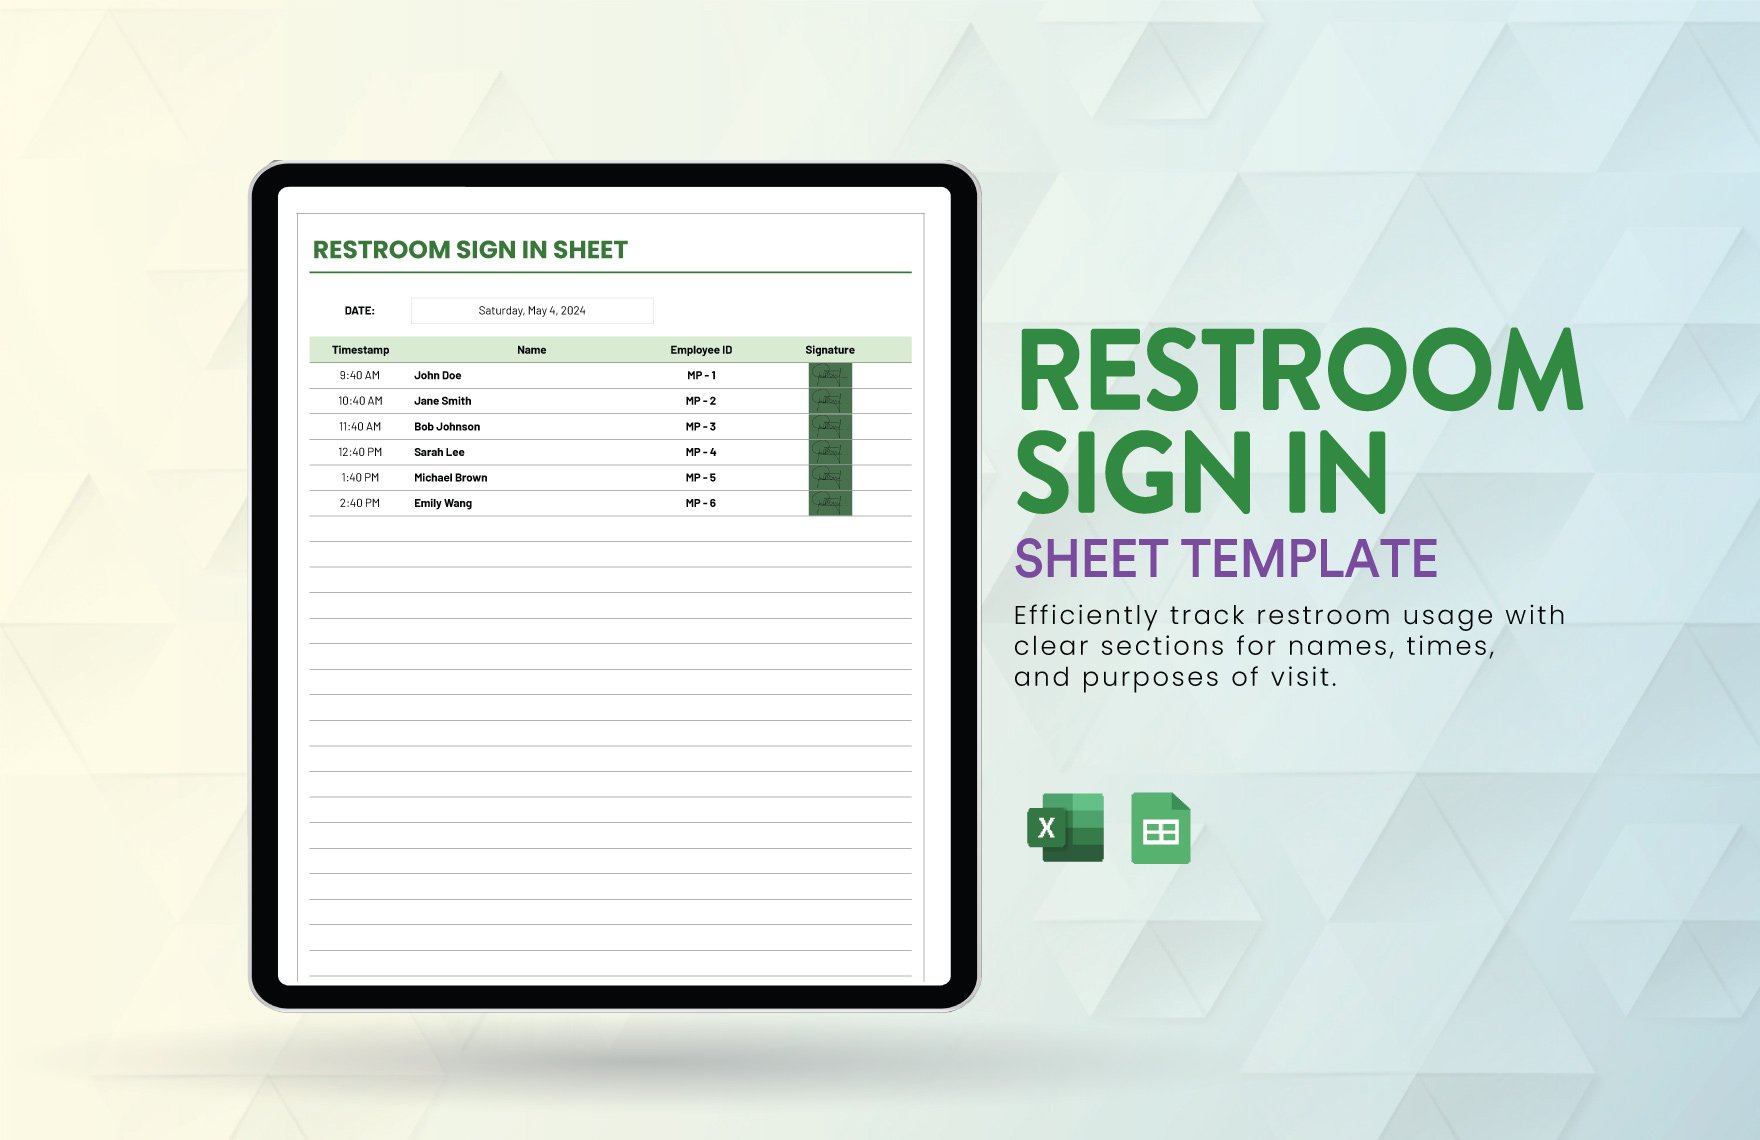 Restroom Sign in Sheet Template